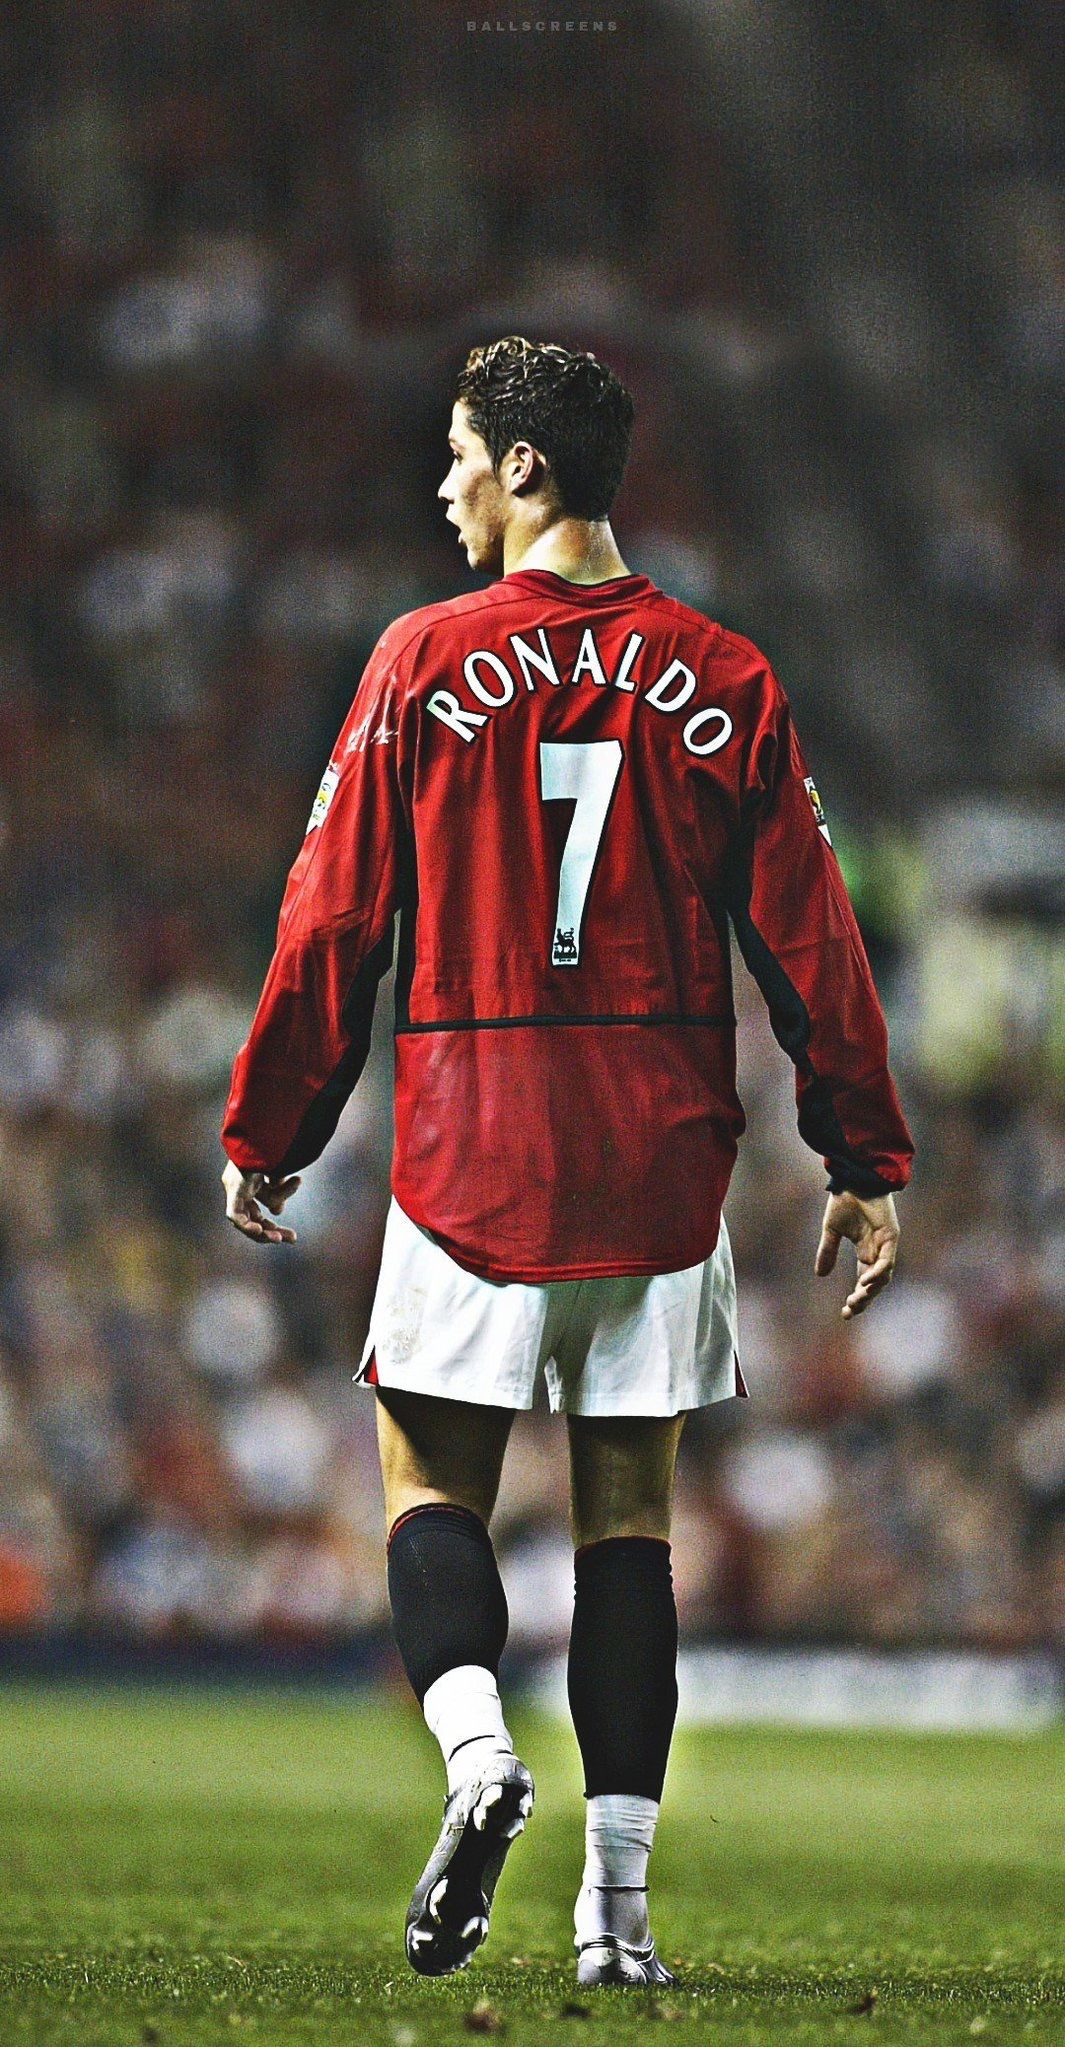 Wallpaper football star Cristiano Ronaldo celebrity player Ronaldo Manchester  United the celebration Manchester United Cristiano Ronaldo Ronaldo  images for desktop section спорт  download